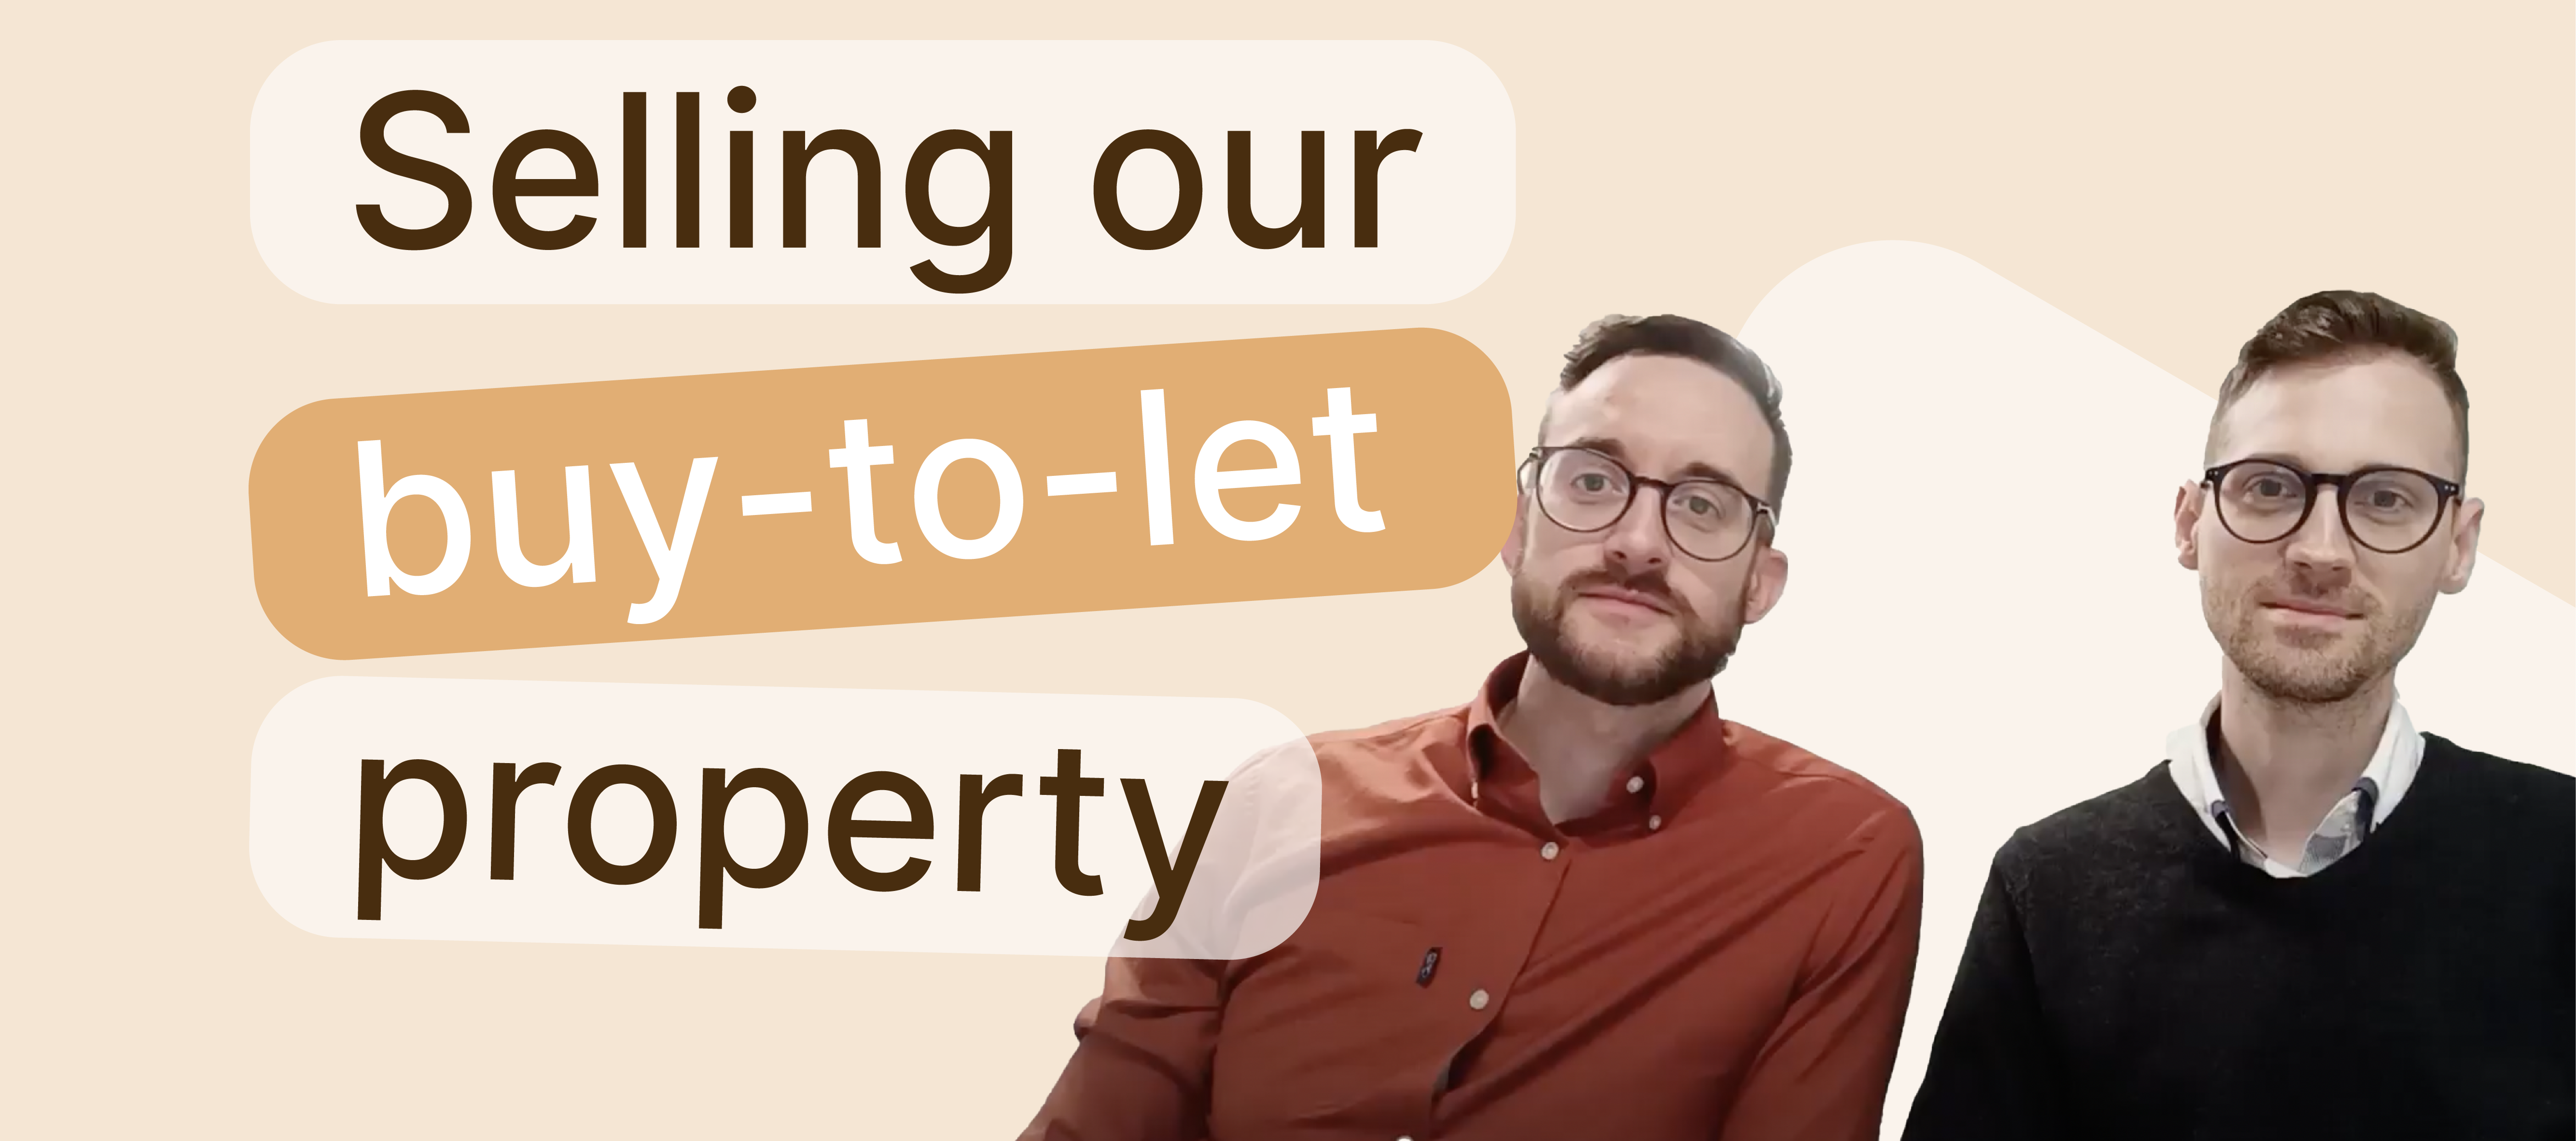 ‘Quick, easy and painless’: how GG Sell helped Johnny and Adam sell their property investment